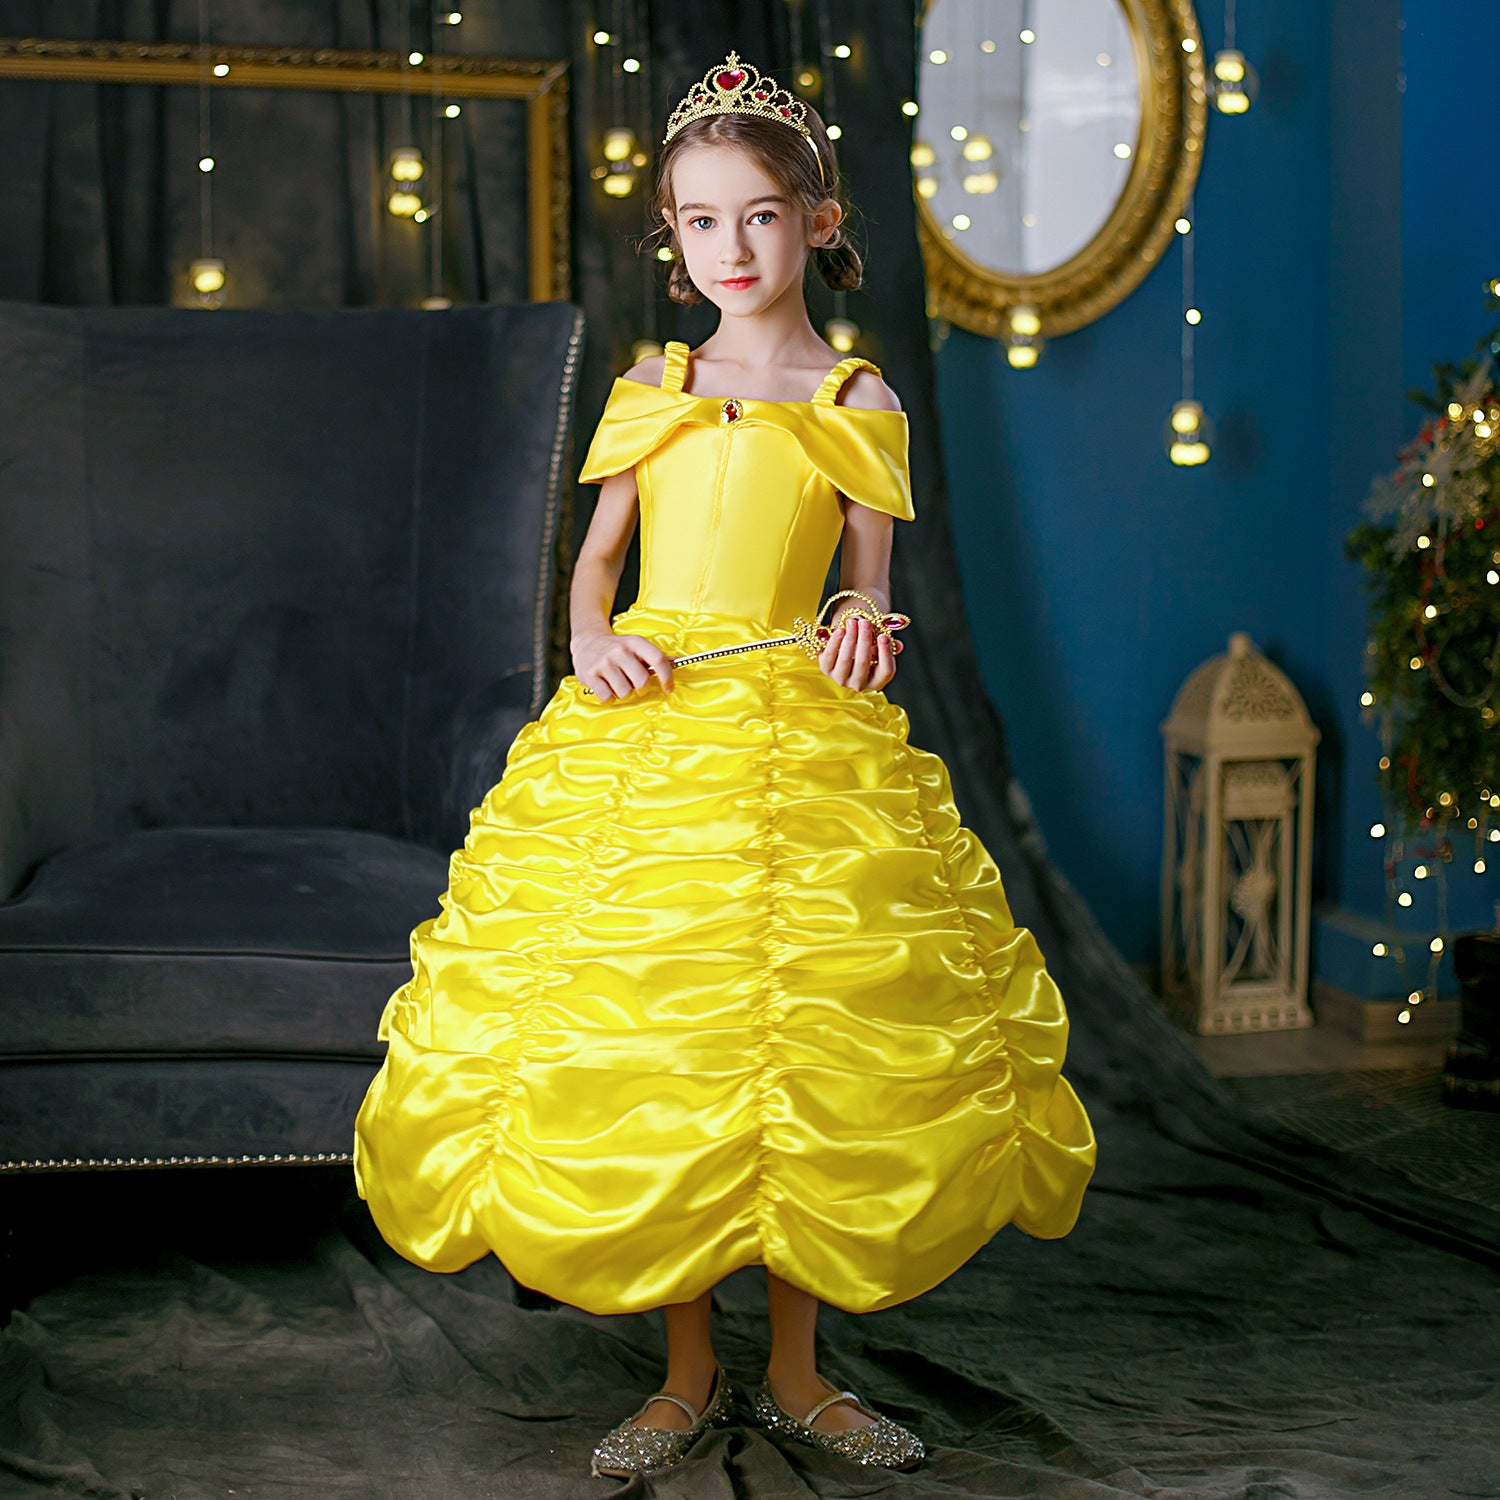 New Girl Costume Dresses Belle Lace Up Princess Cosplay Birthday Party Holiday Fancy